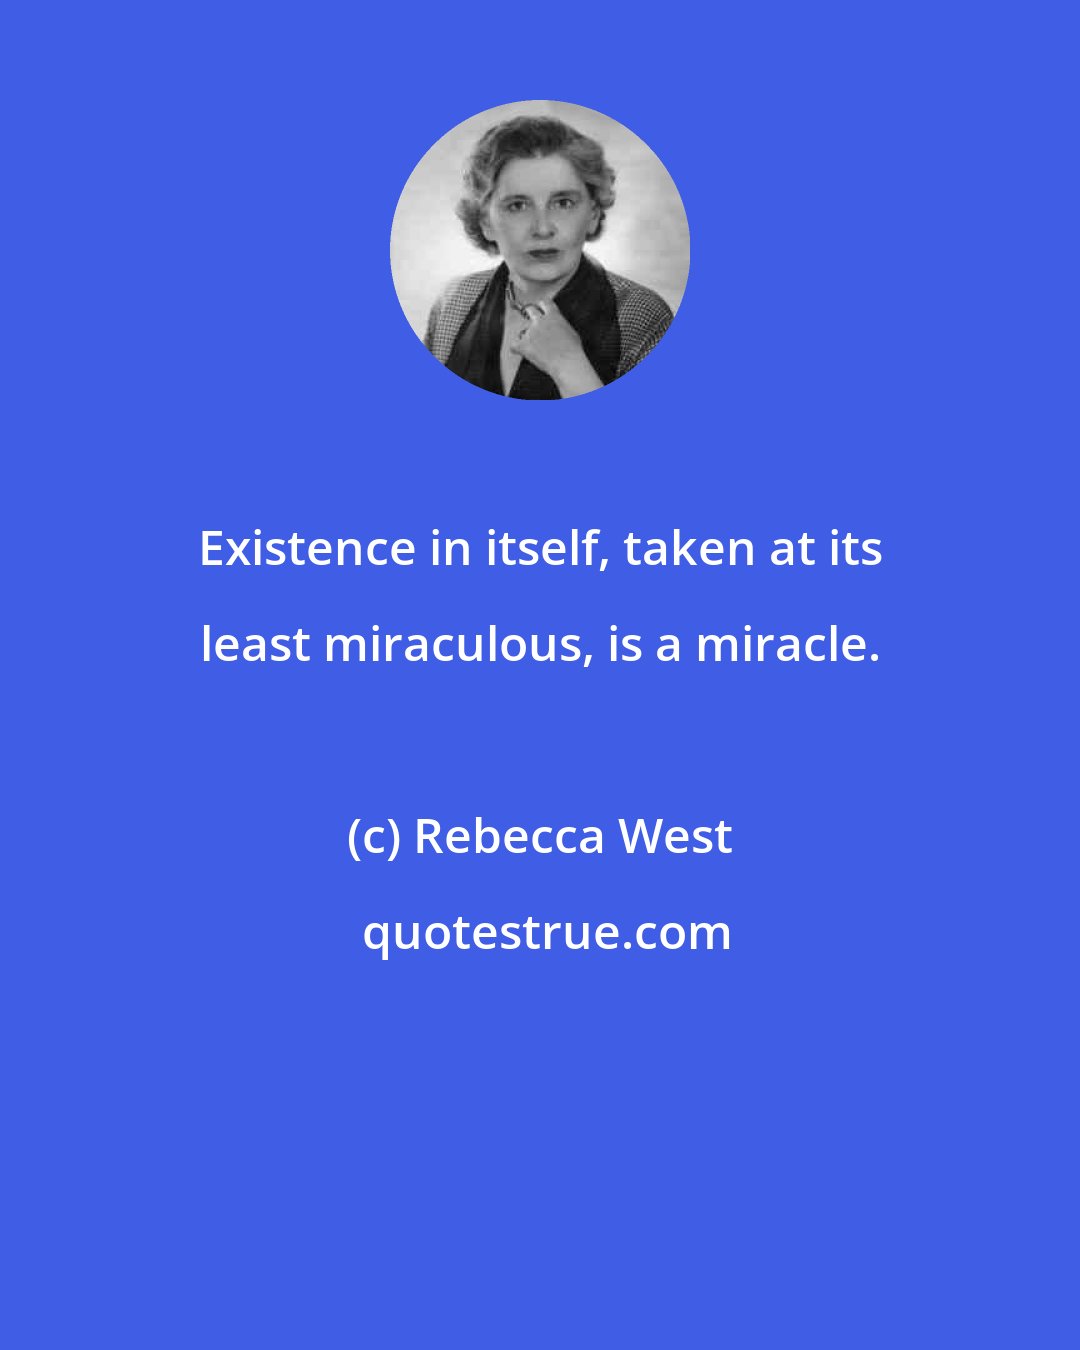 Rebecca West: Existence in itself, taken at its least miraculous, is a miracle.